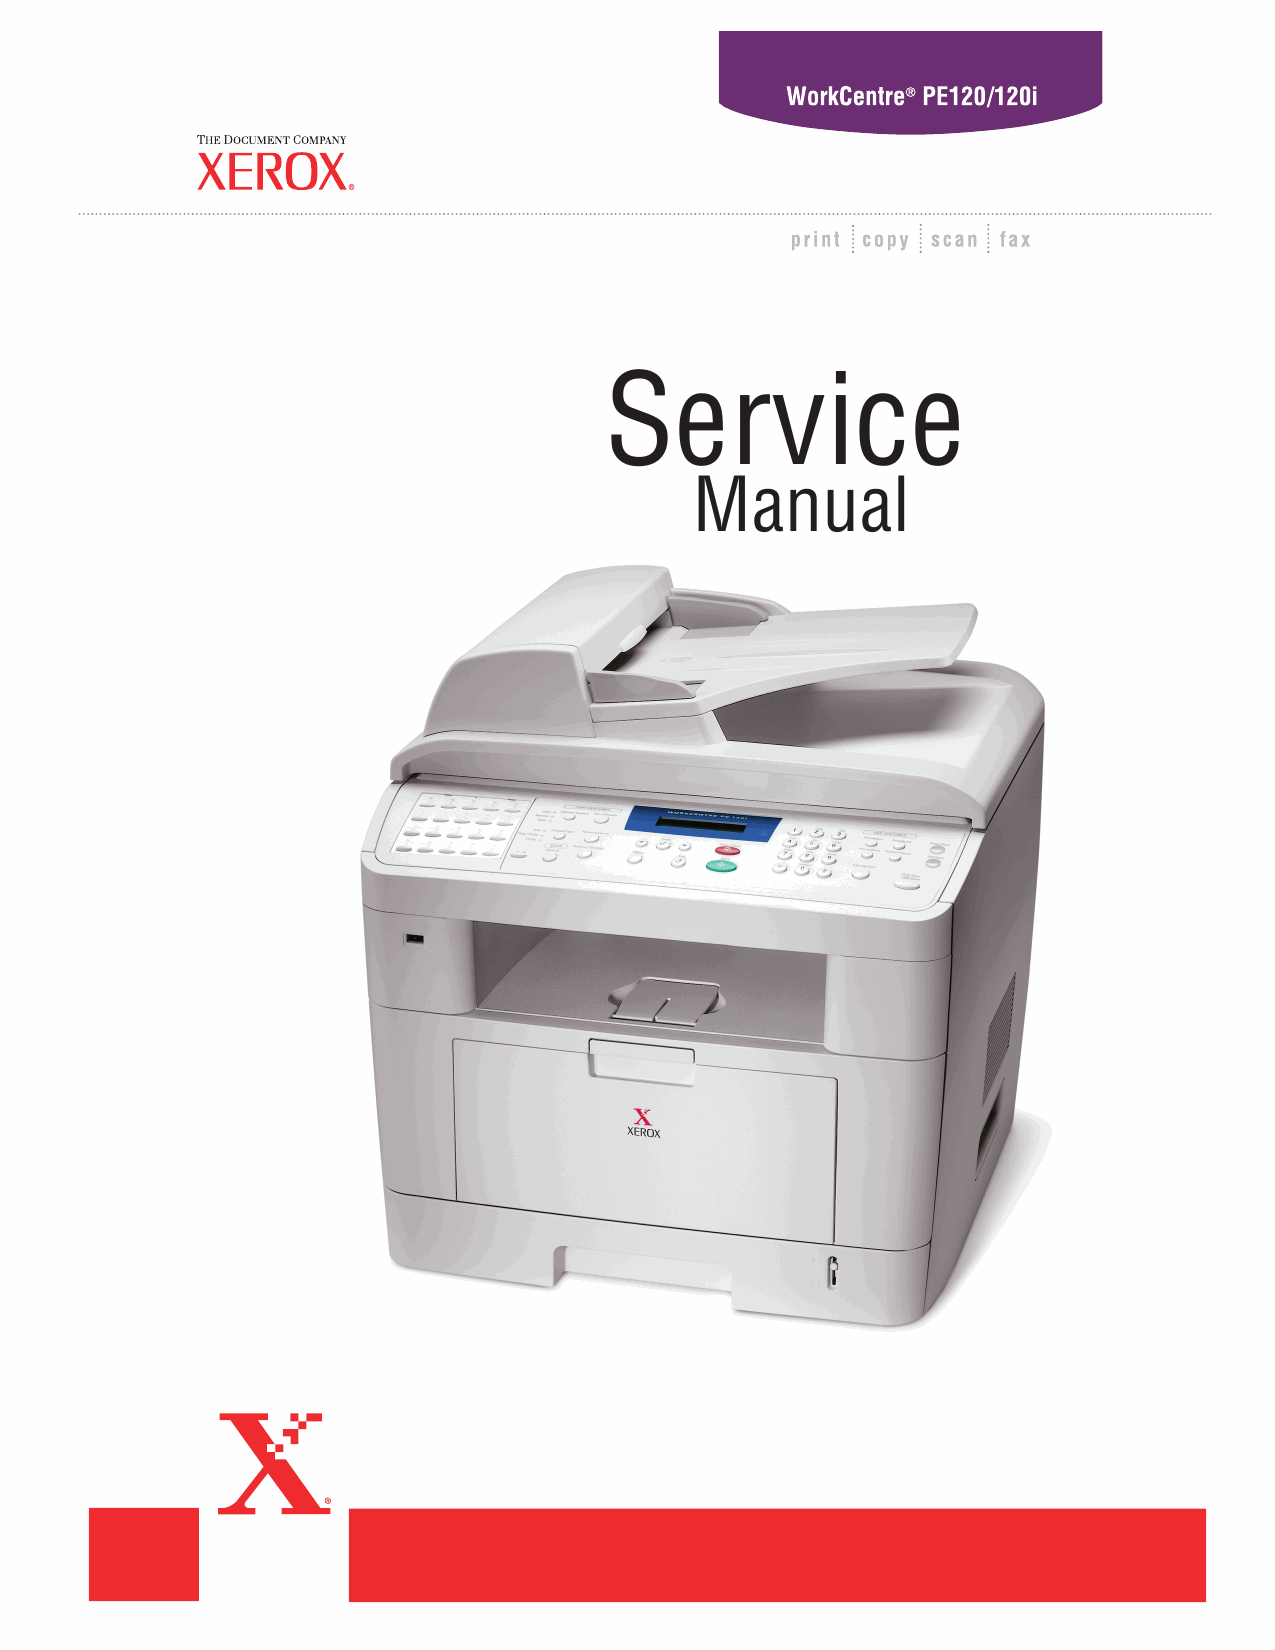 Xerox WorkCentre PE-120 Parts List and Service Manual-1